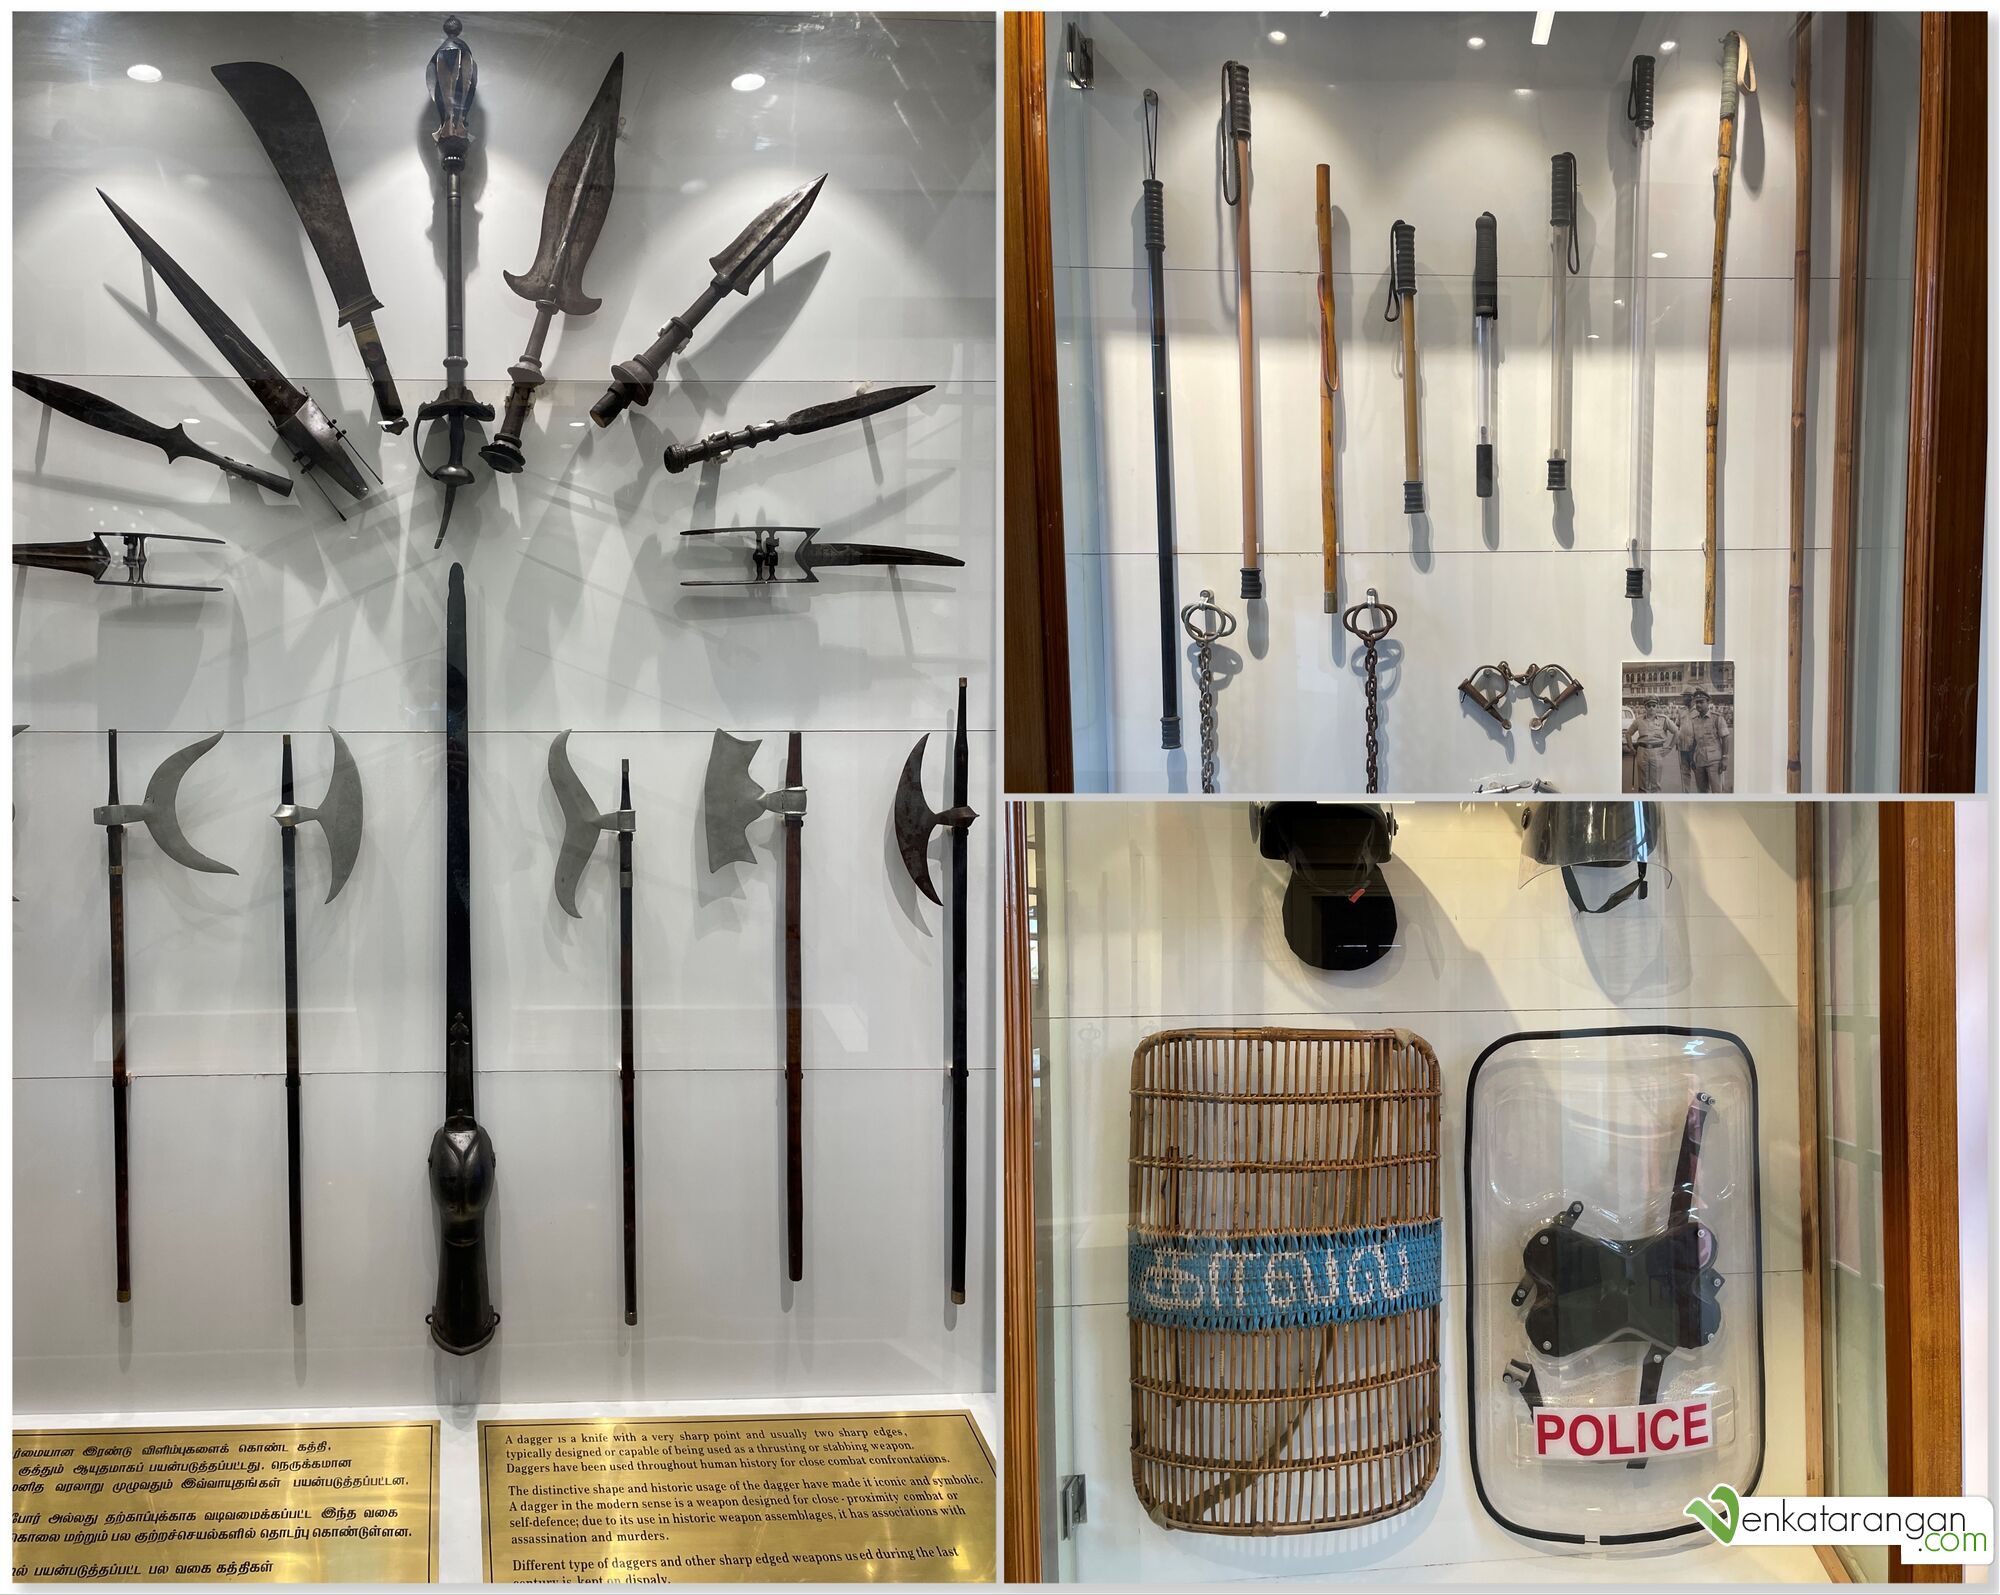 Daggers, Lathis and Shields used by the Tamil Nadu Police Force